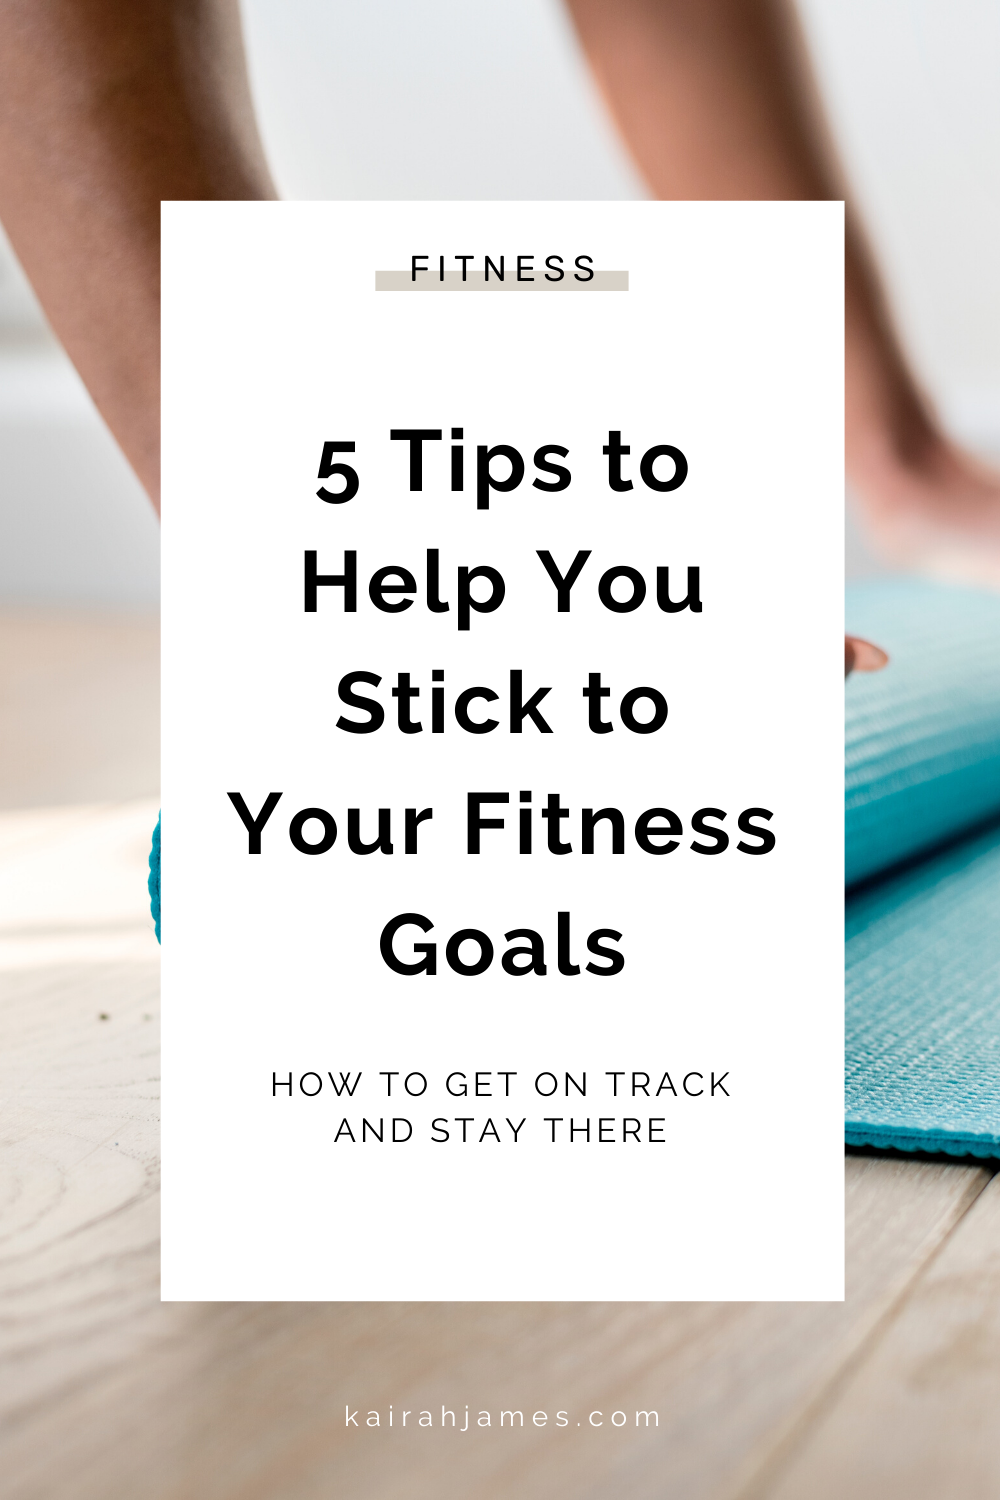 Learn the 5 tip that will help you stick to your fitness goals once and for all. Read the full blog post here:  https://www.kairahjames.com/blog/5-tips-to-help-you-stick-to-your-fitness-goals